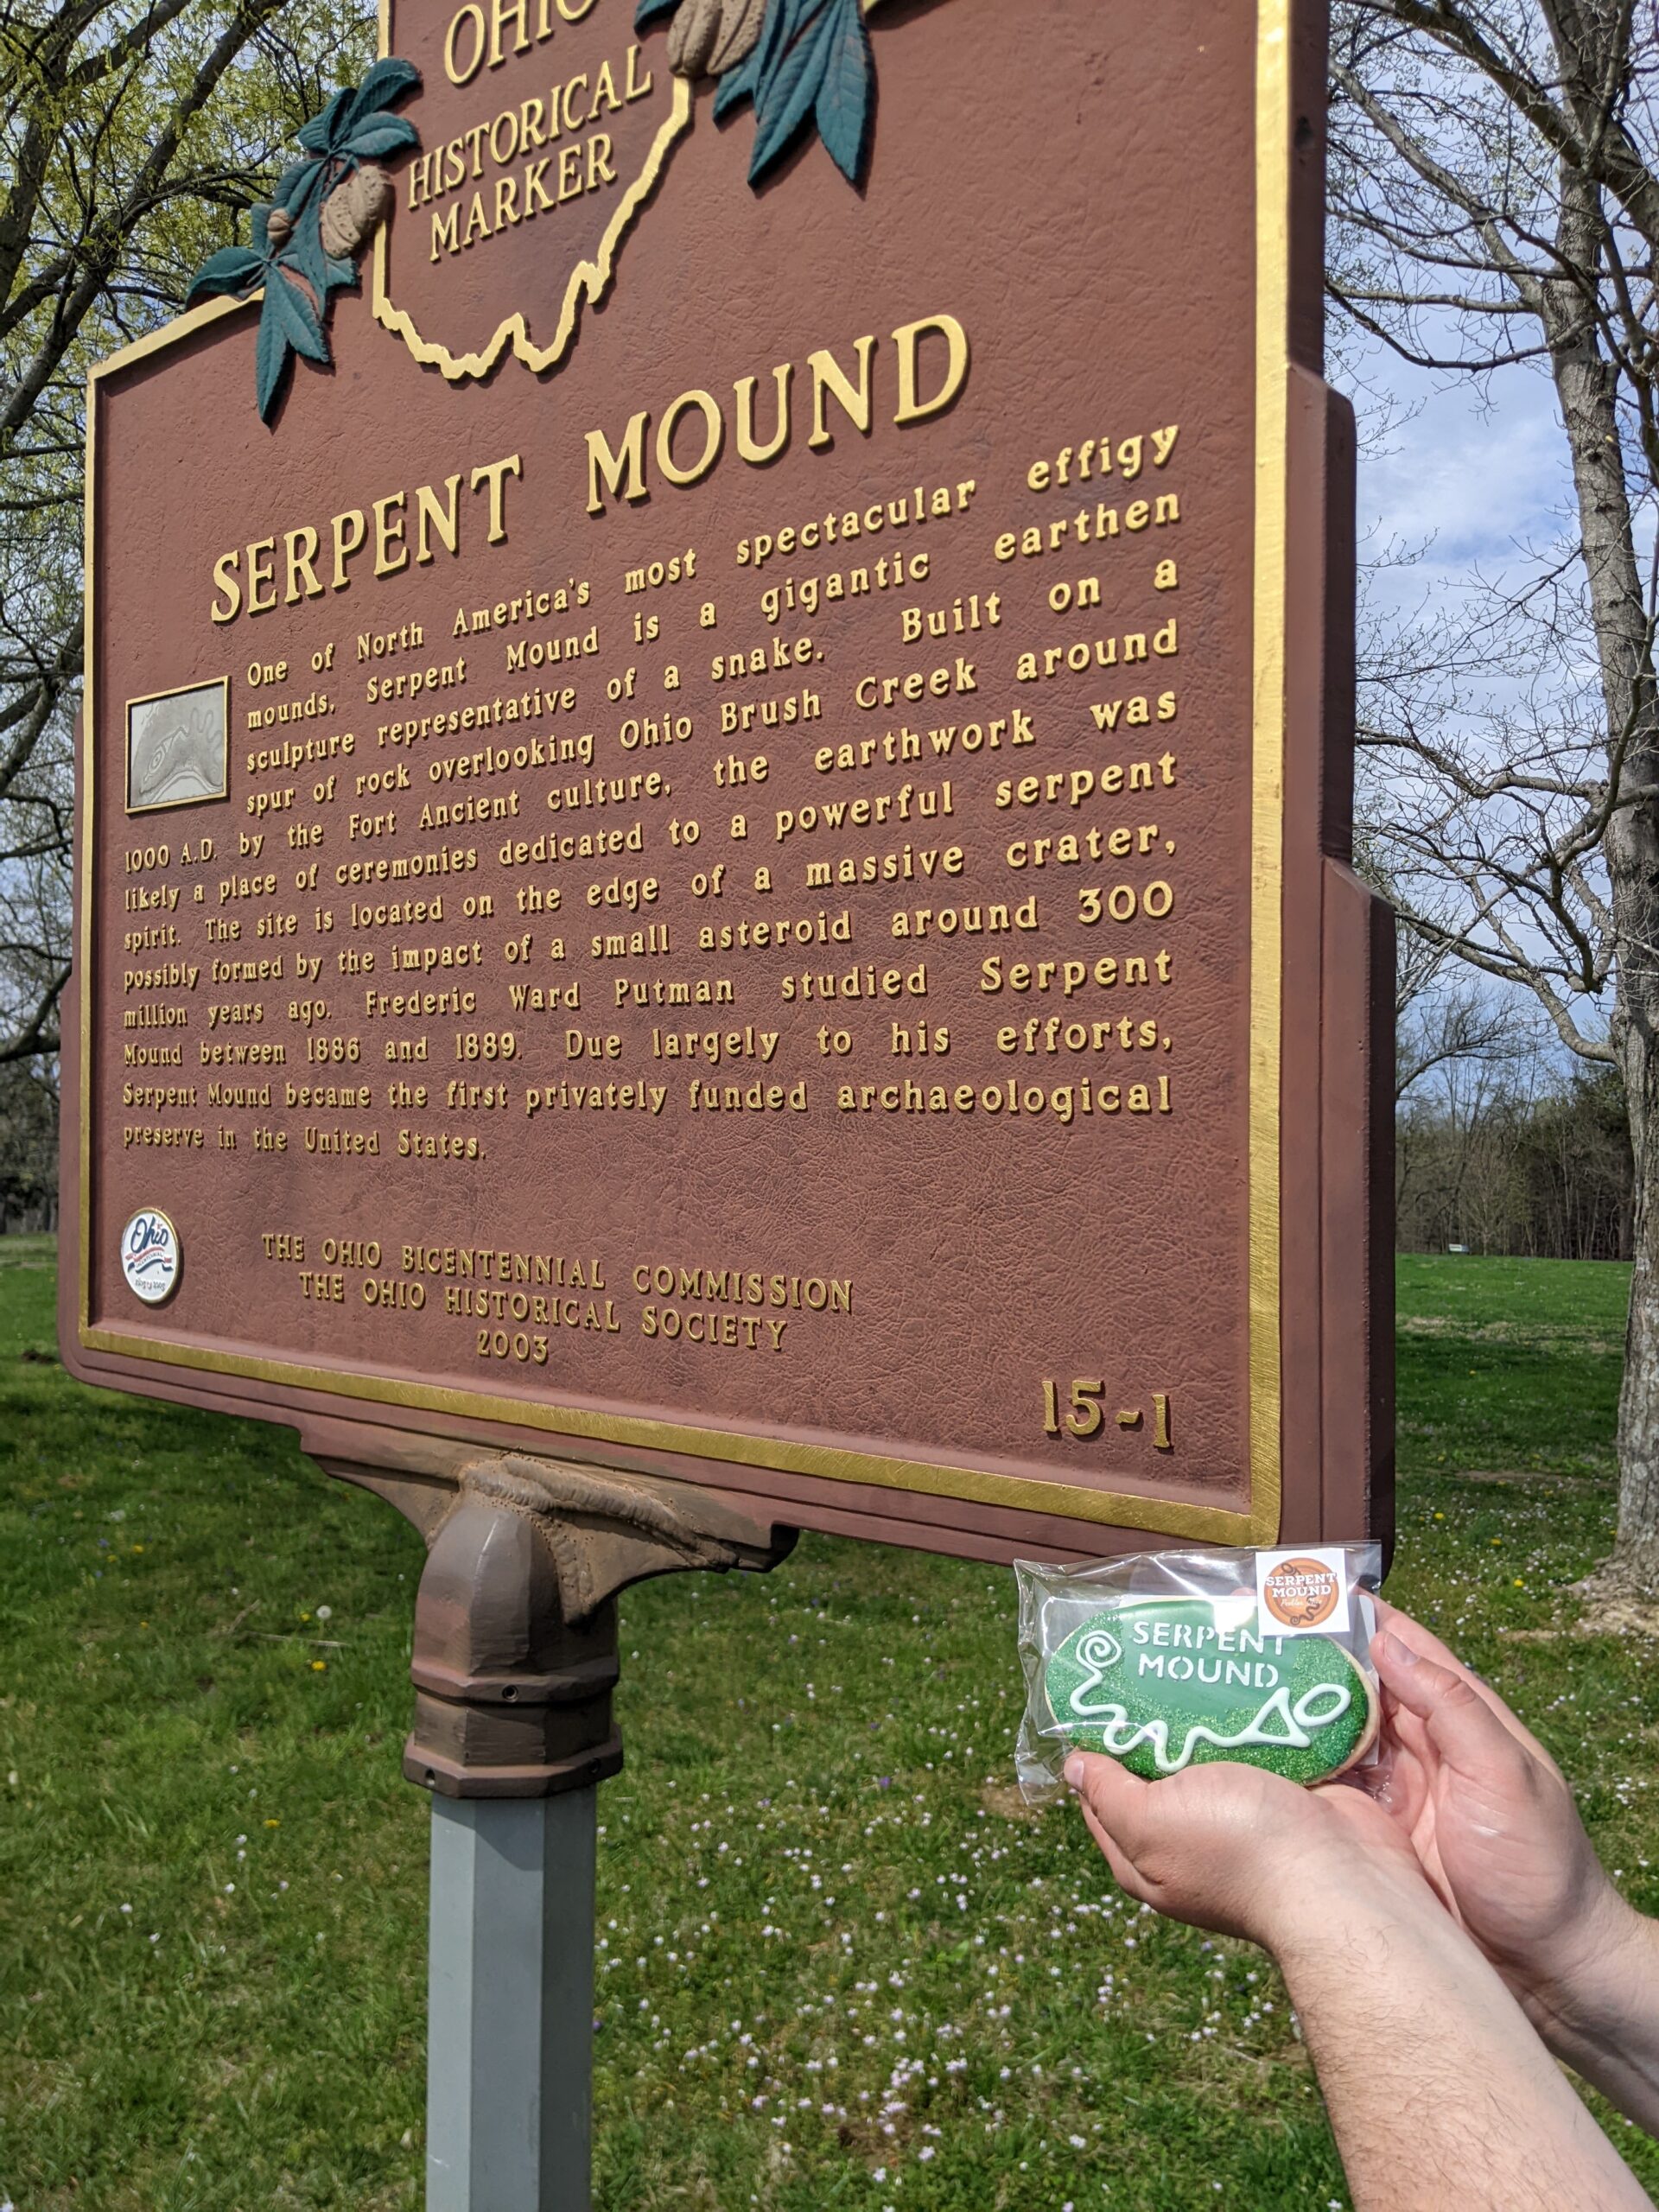 Ohio Historical Marker - Serpent Mound - One of North AMerica's most spectacular effigy mounds. Serpent Mound is a gigantic earthen sculpture representative of a snake. Built on a spur of rock overlooking Ohio Brush Creek around 1000 AD by the Fort Ancient culture, the earthwork was likely a place of ceremonies dedicated to a powerful serpent spirit. The site is located on the edge of a massive crater, possibly formed by the impact of a small asteroid around 300 million years ago. Frederic Ward Putman studied Serpent Mound between 1886 and 1889. Due largely to his efforts, Serpent Mound became the first privately funded archaeological preserve in the United States.